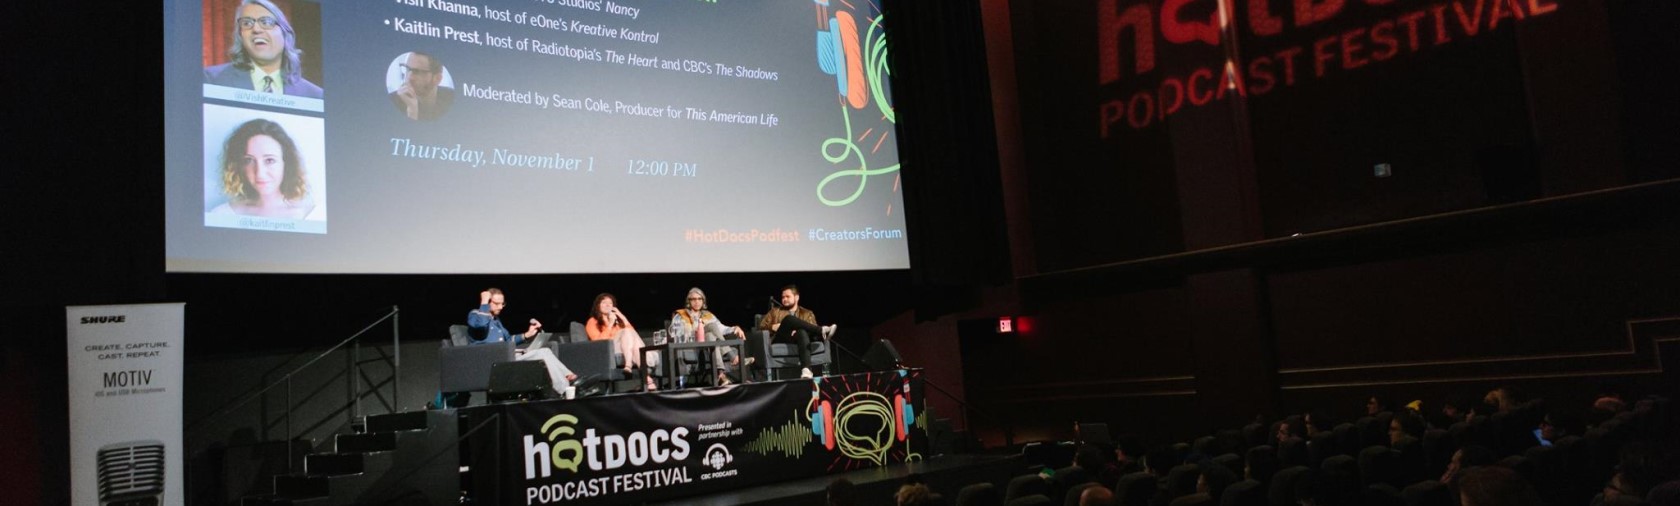 Speakers on stage at Hot Docs Ted Rogers Cinema